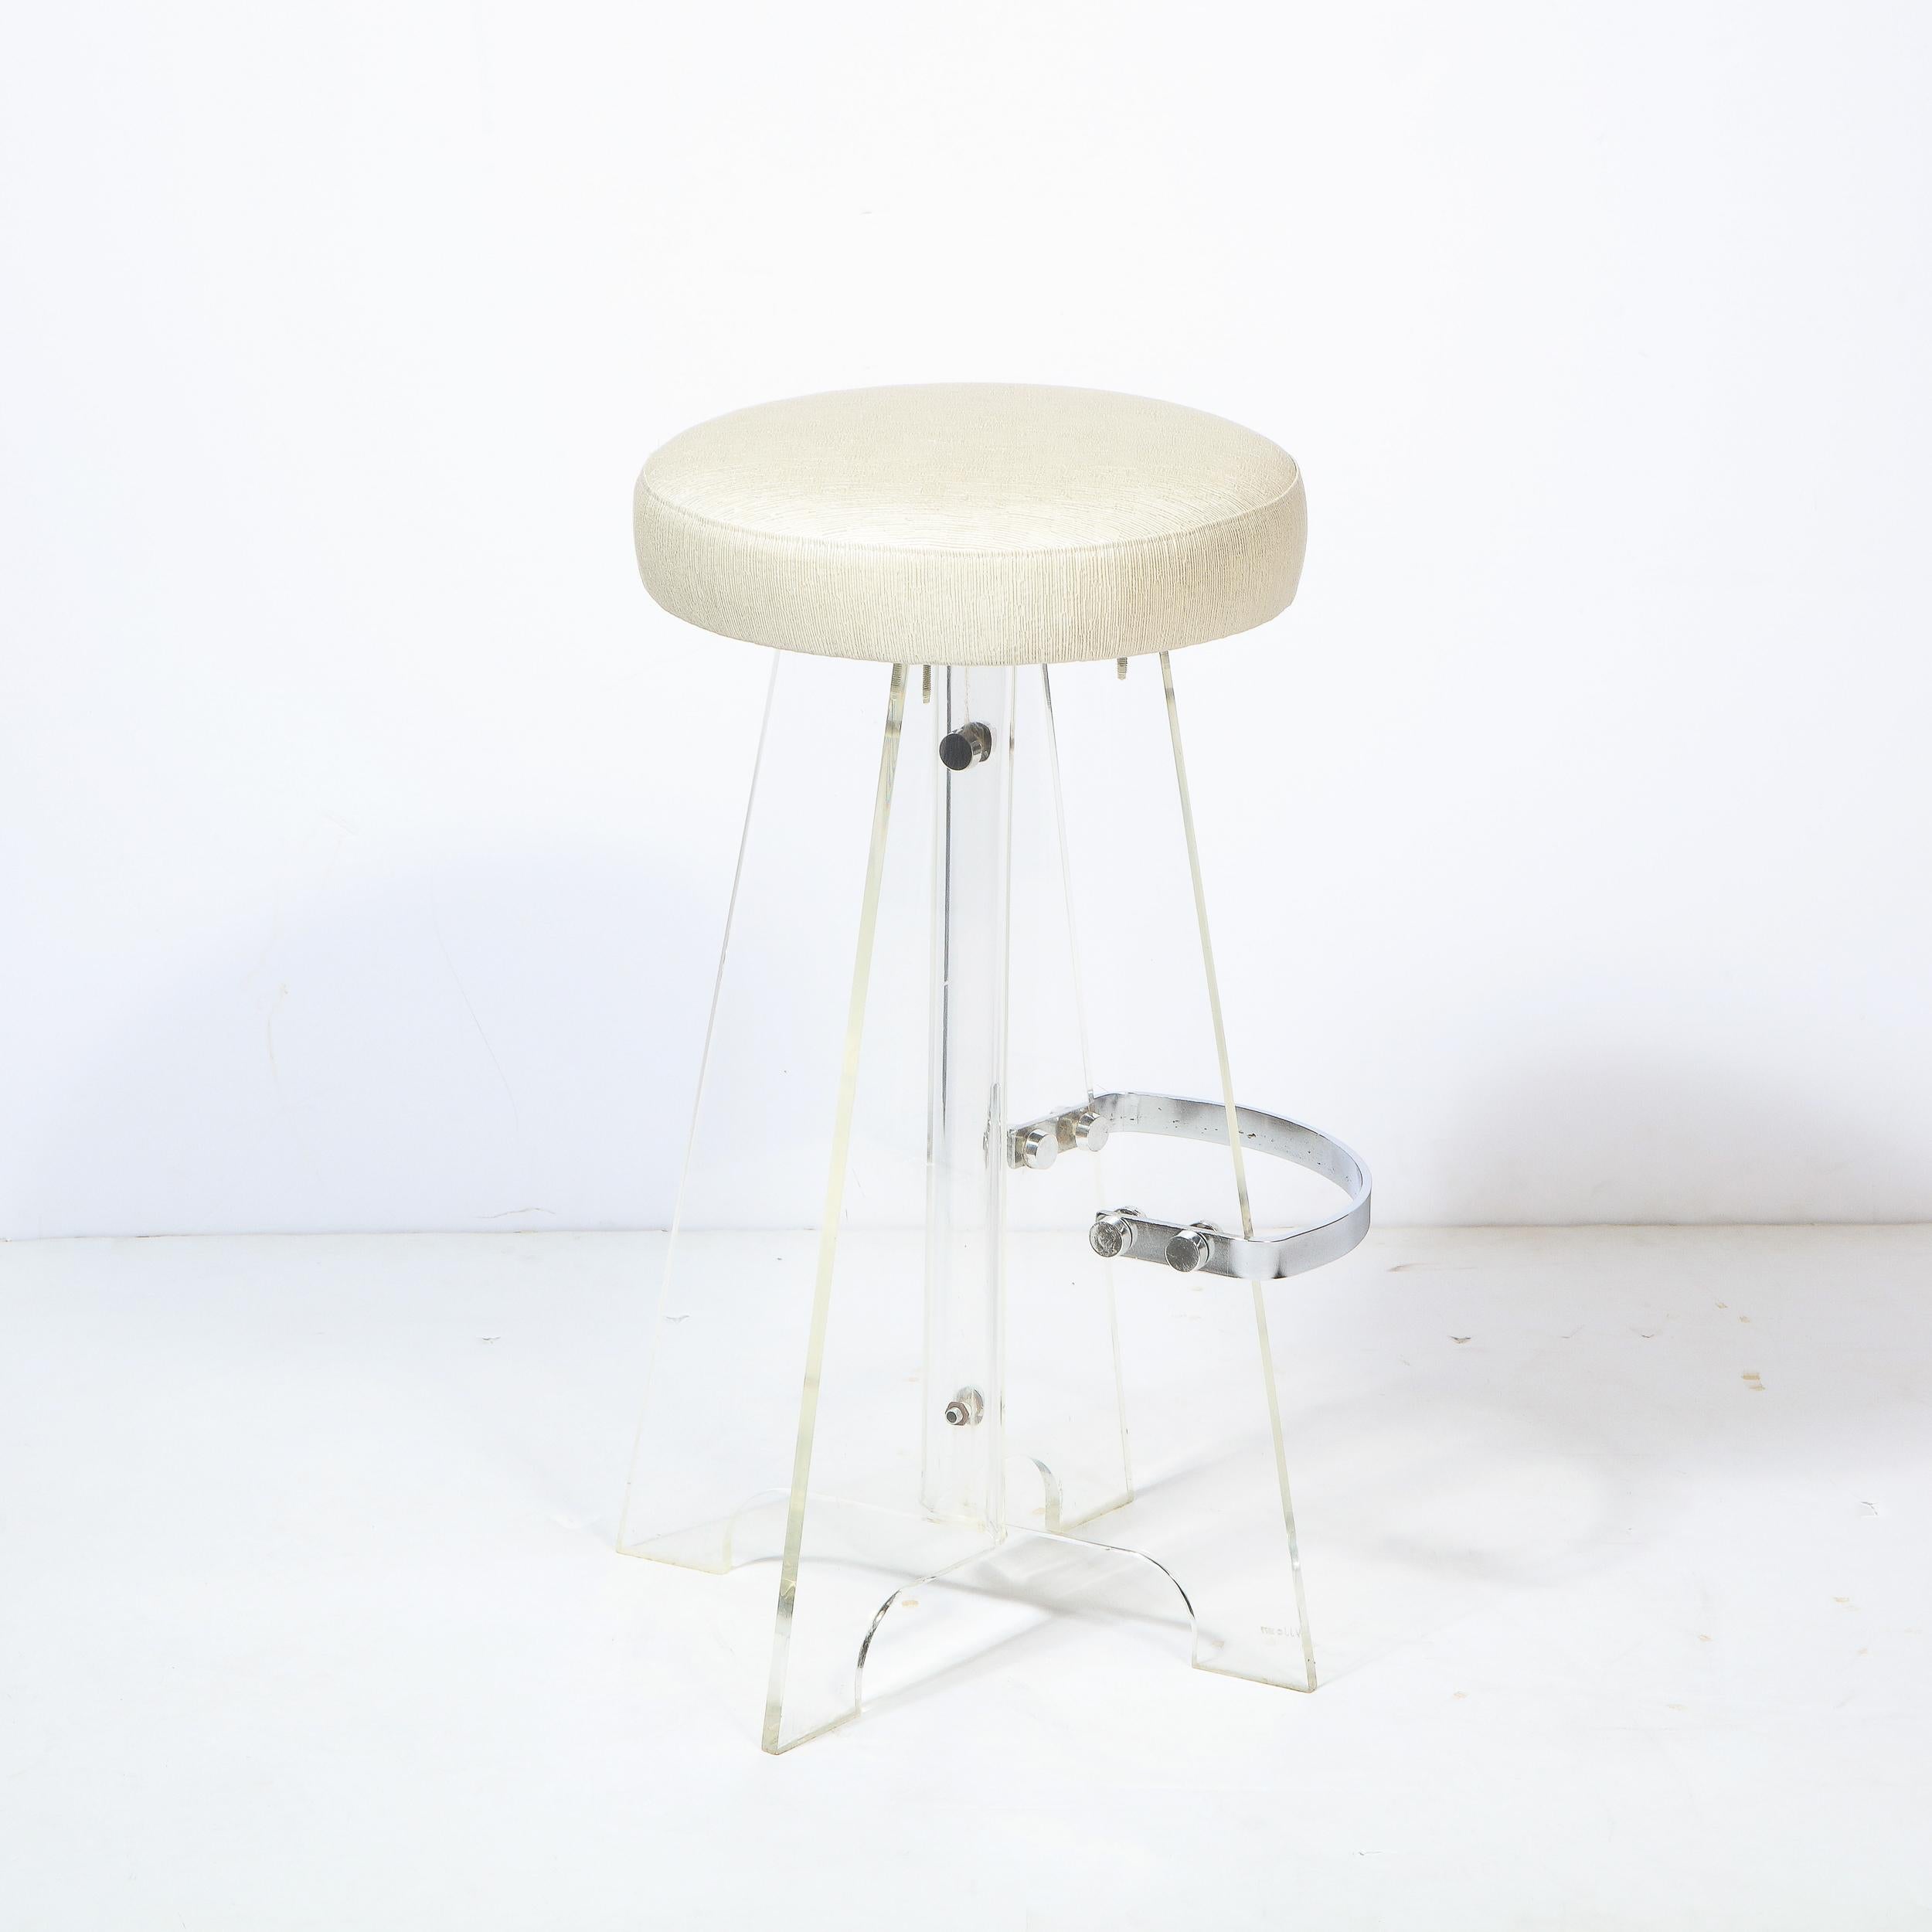 Pair of Mid-Century Modern Lucite, Chrome Bar Stools in Holly Hunt Upholstery For Sale 2